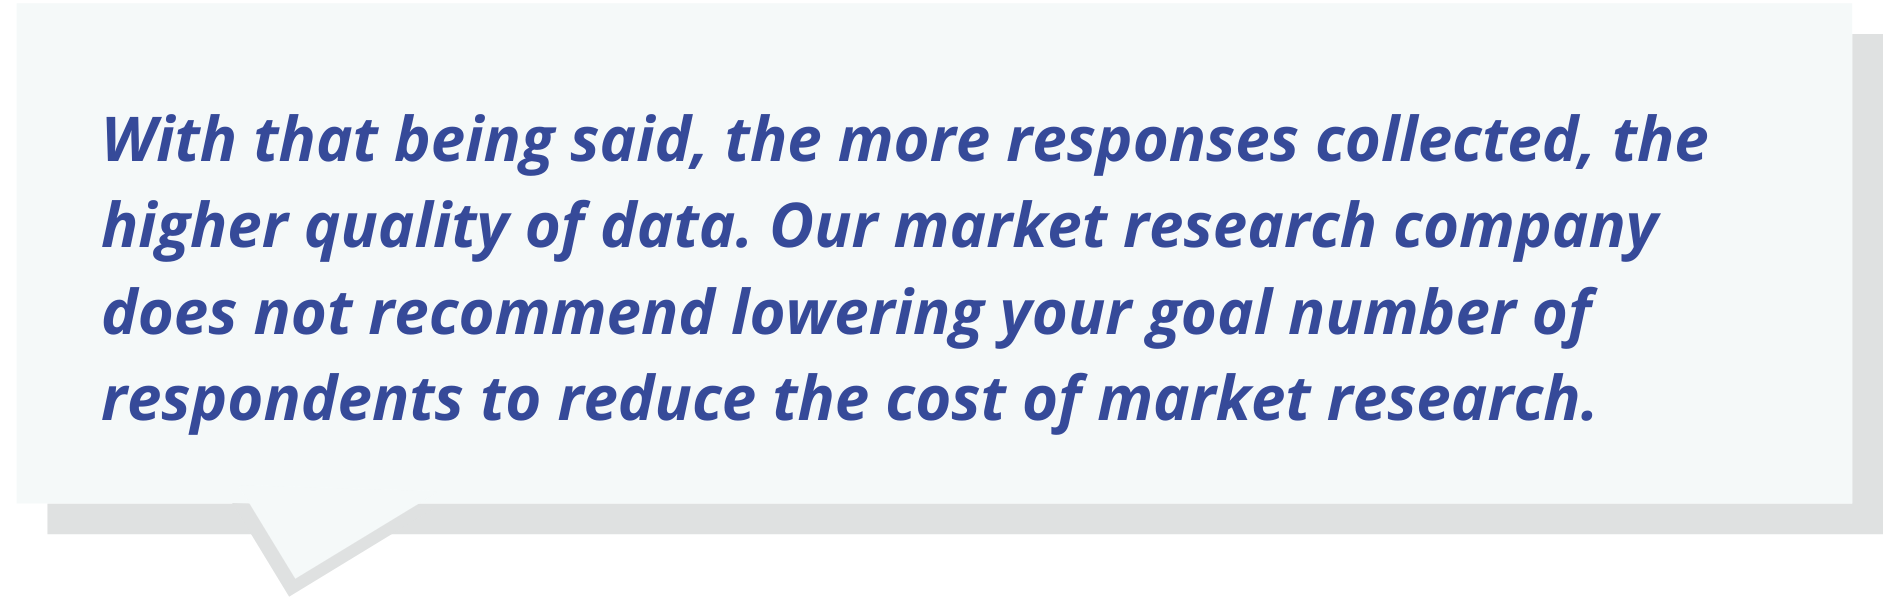 With that being said, the more responses collected, the higher quality of data. Our market research company does not recommend lowering your goal number of respondents to reduce the cost of market research.